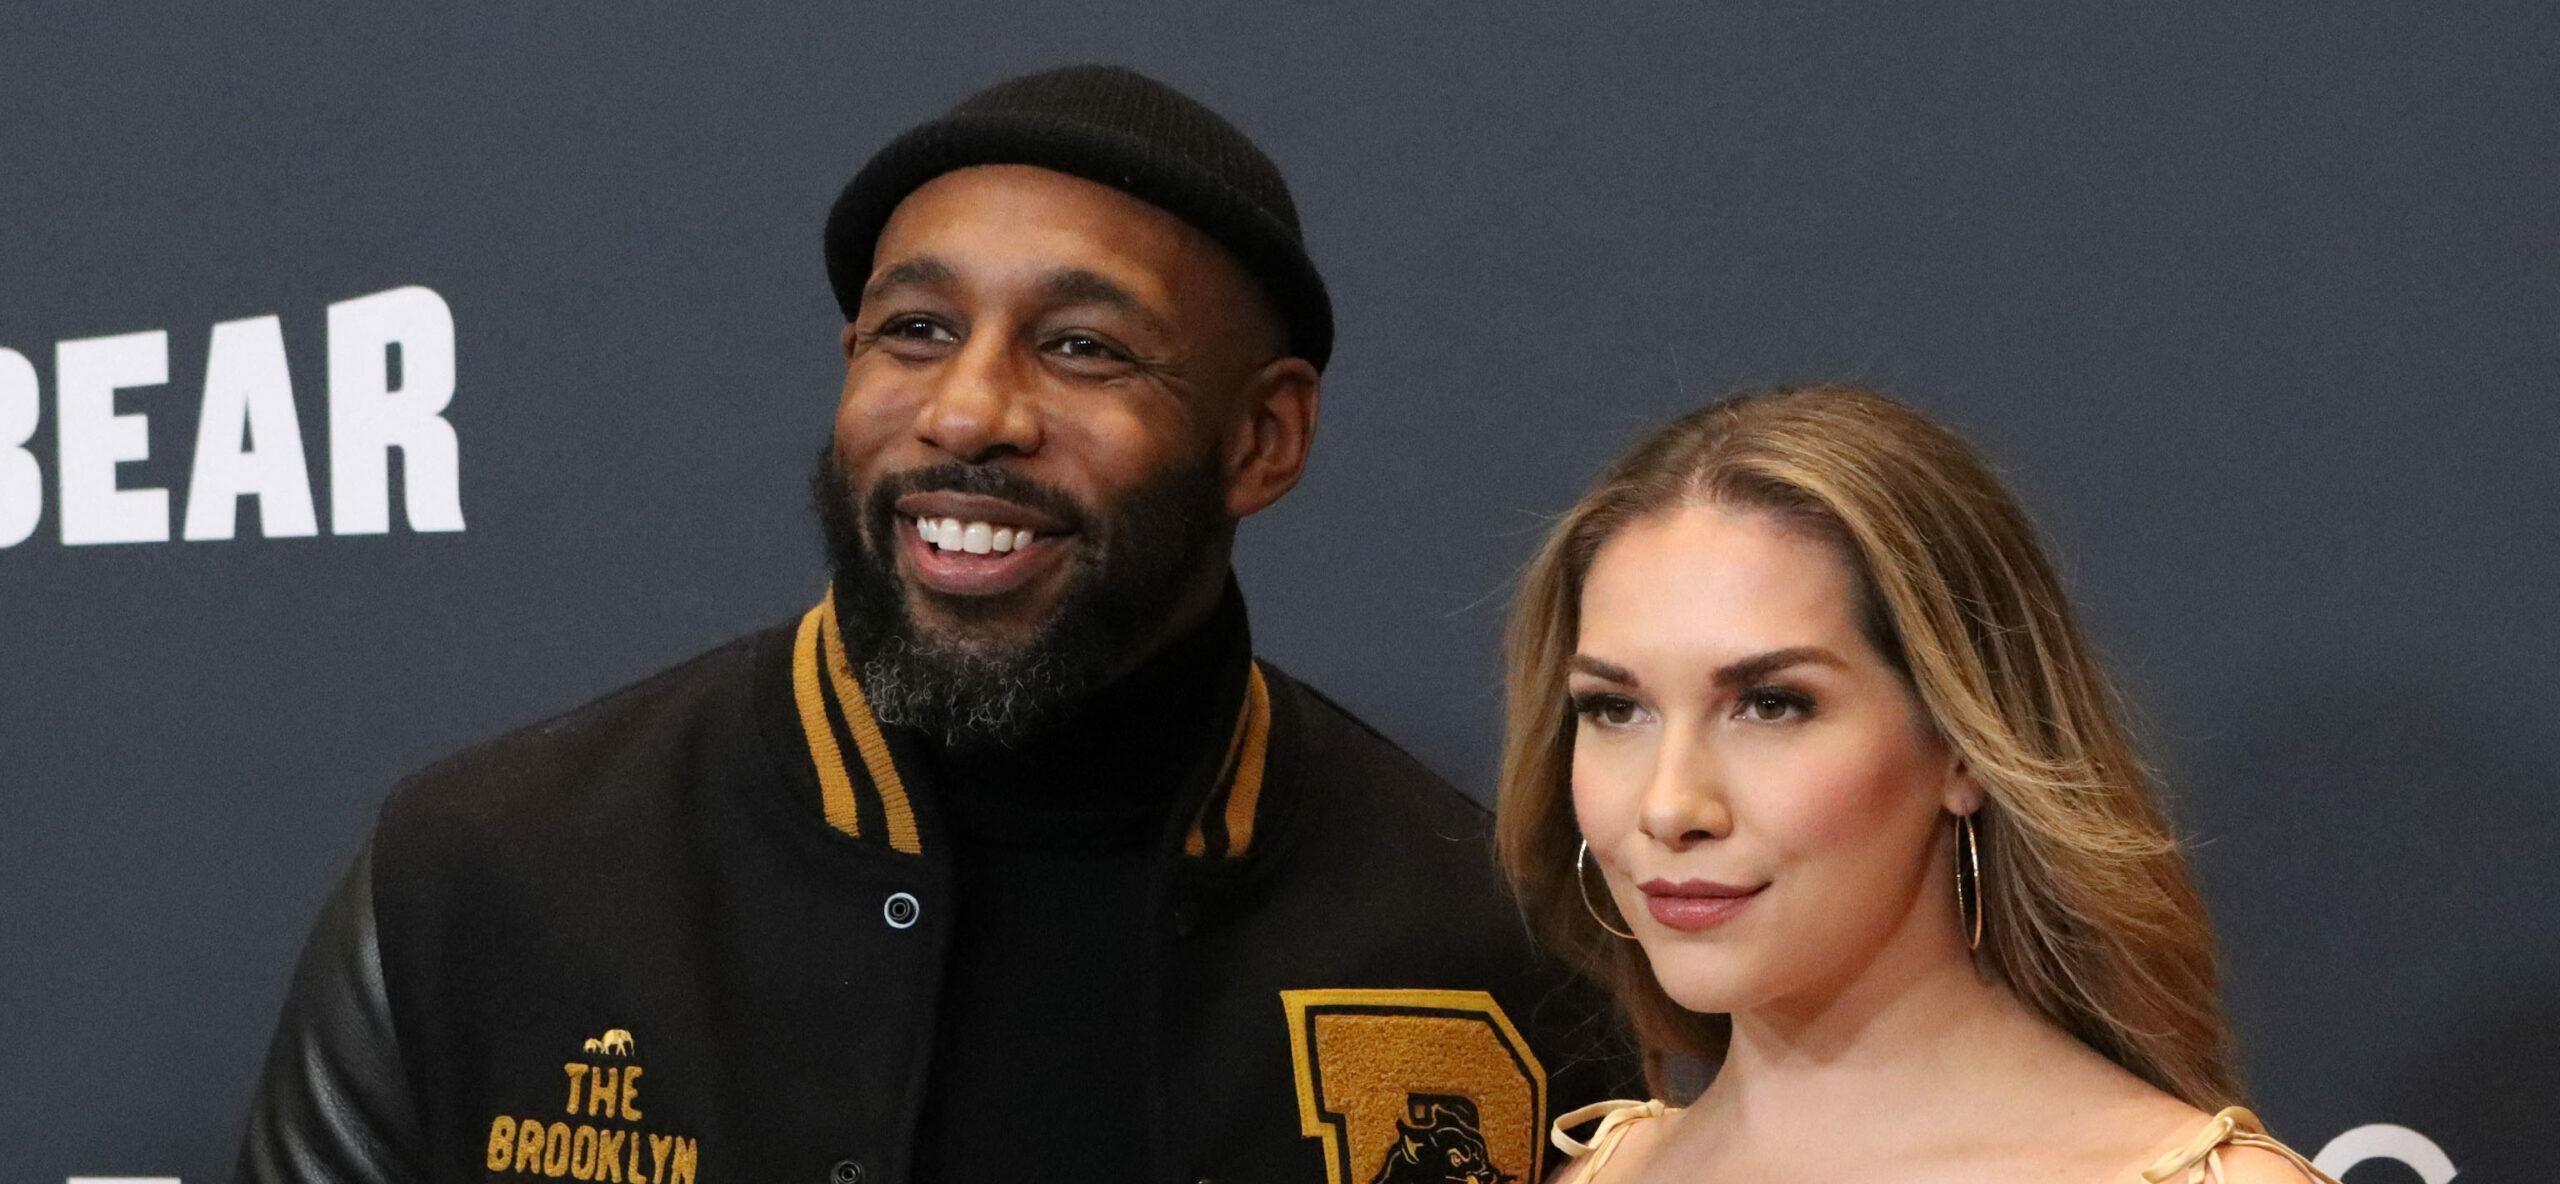 Inside Allison Holker And Kid’s First Easter Without Stephen ‘tWitch’ Boss